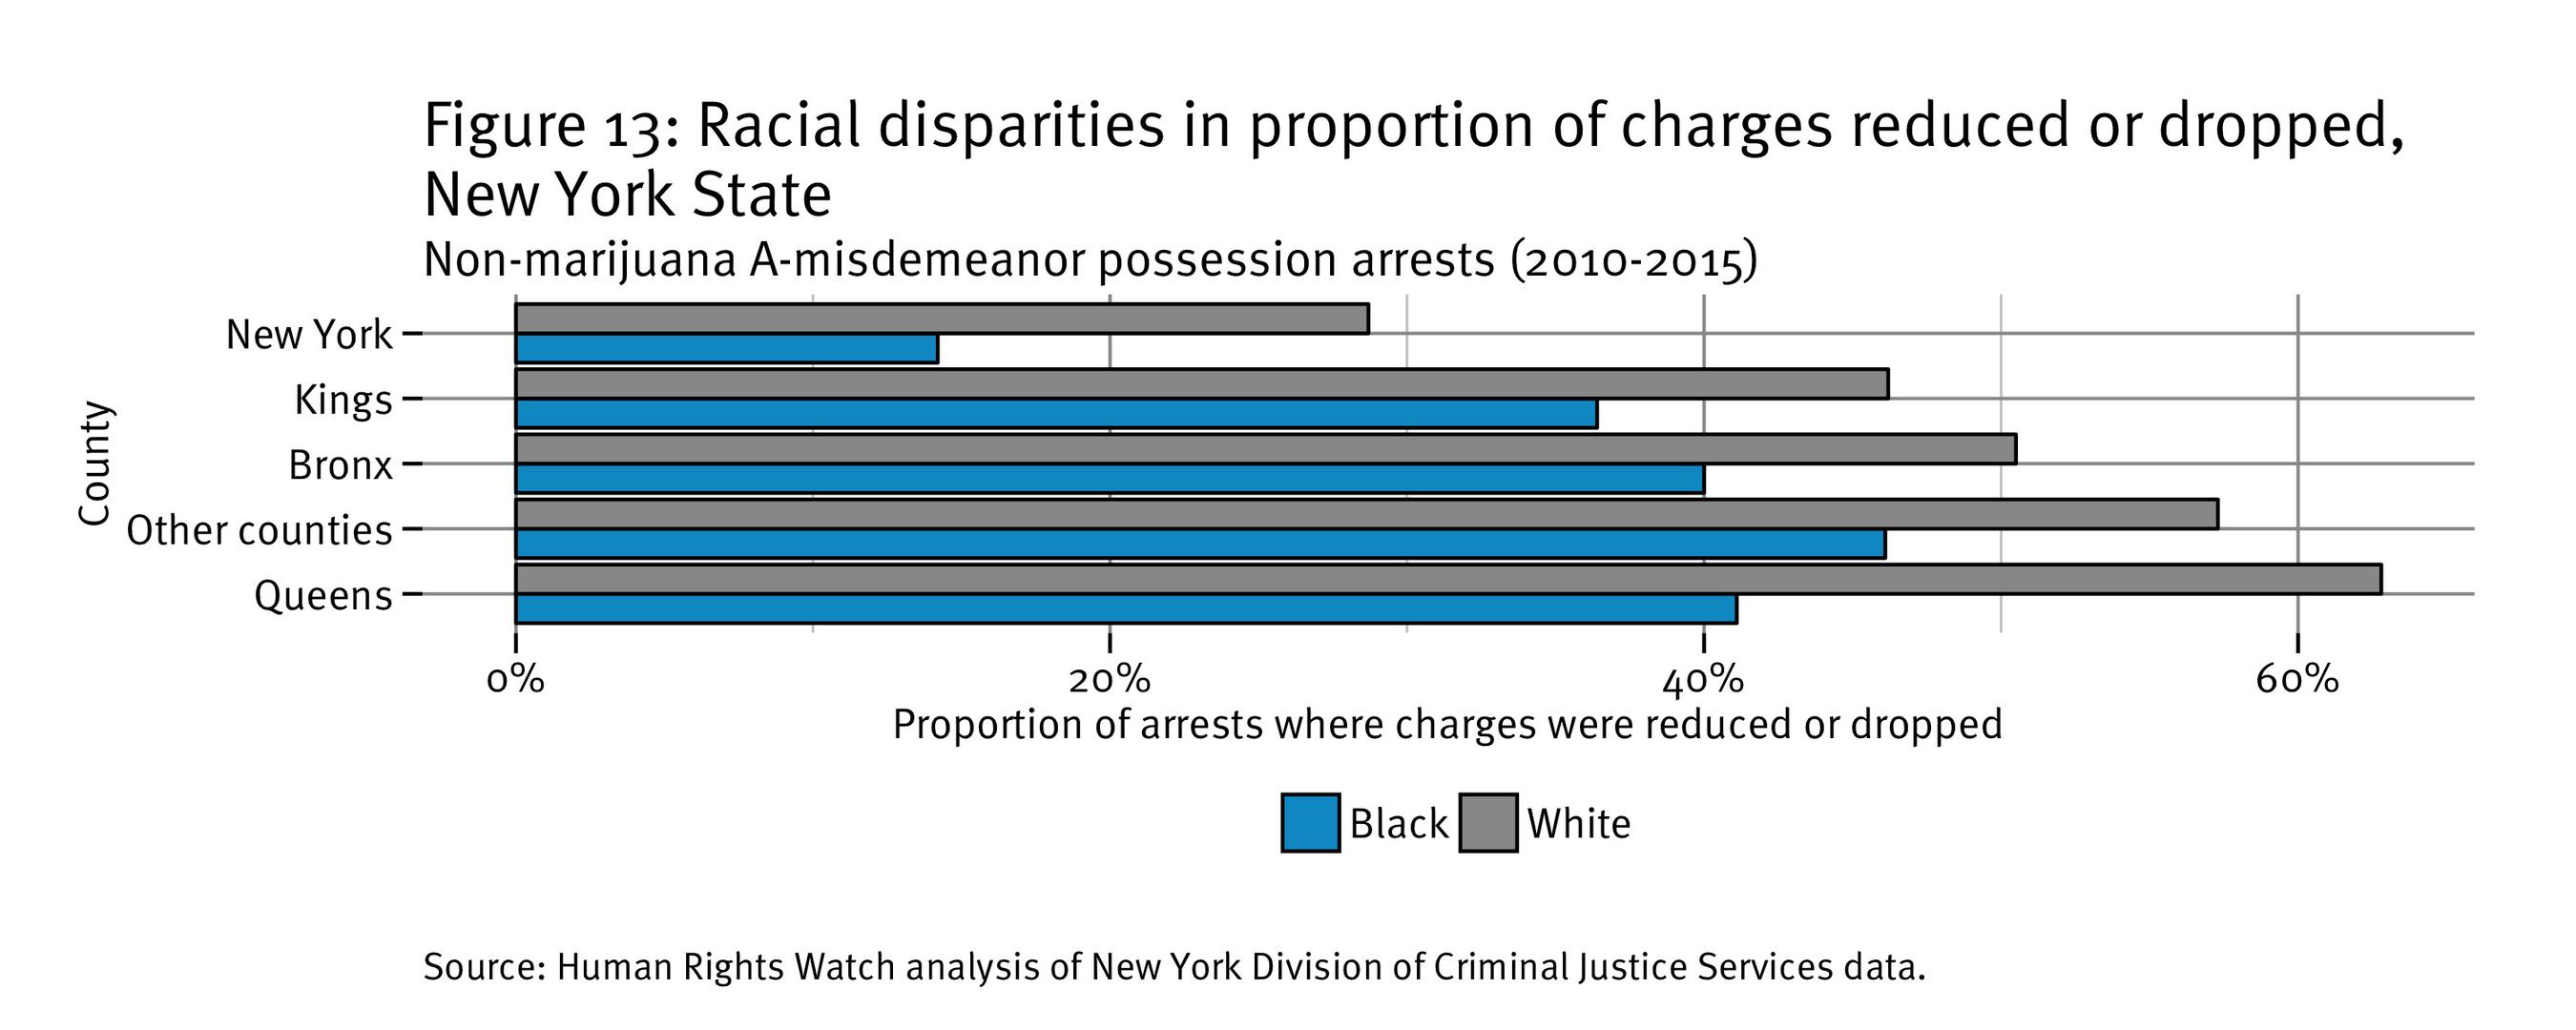 Figure 13: Racial disparities in the charges reduced or dropped in New York state